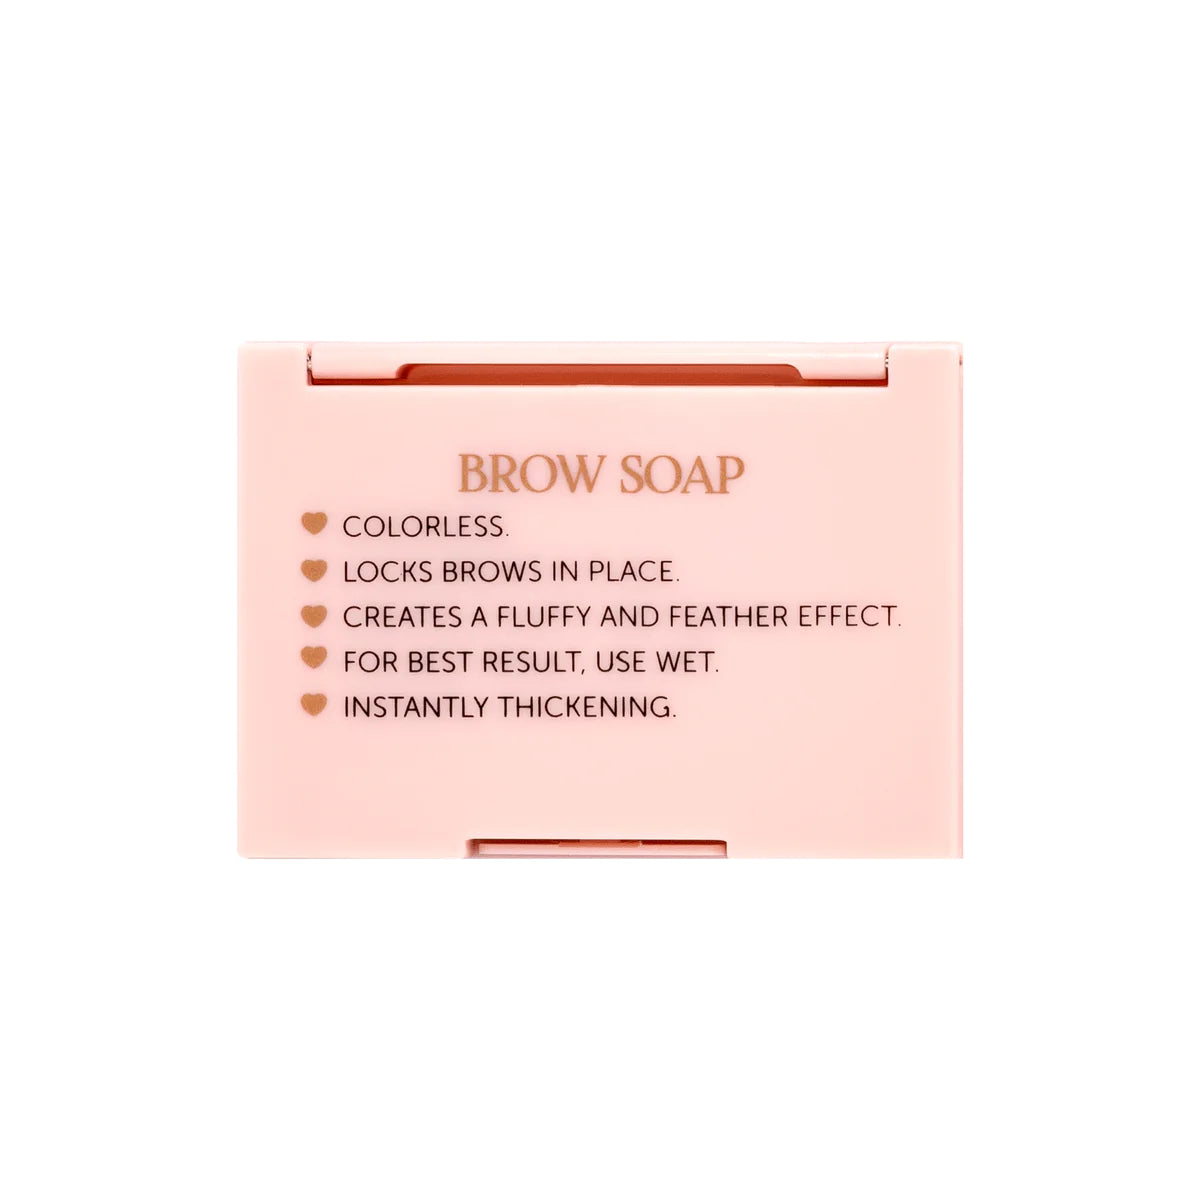 Beauty creations brow soap